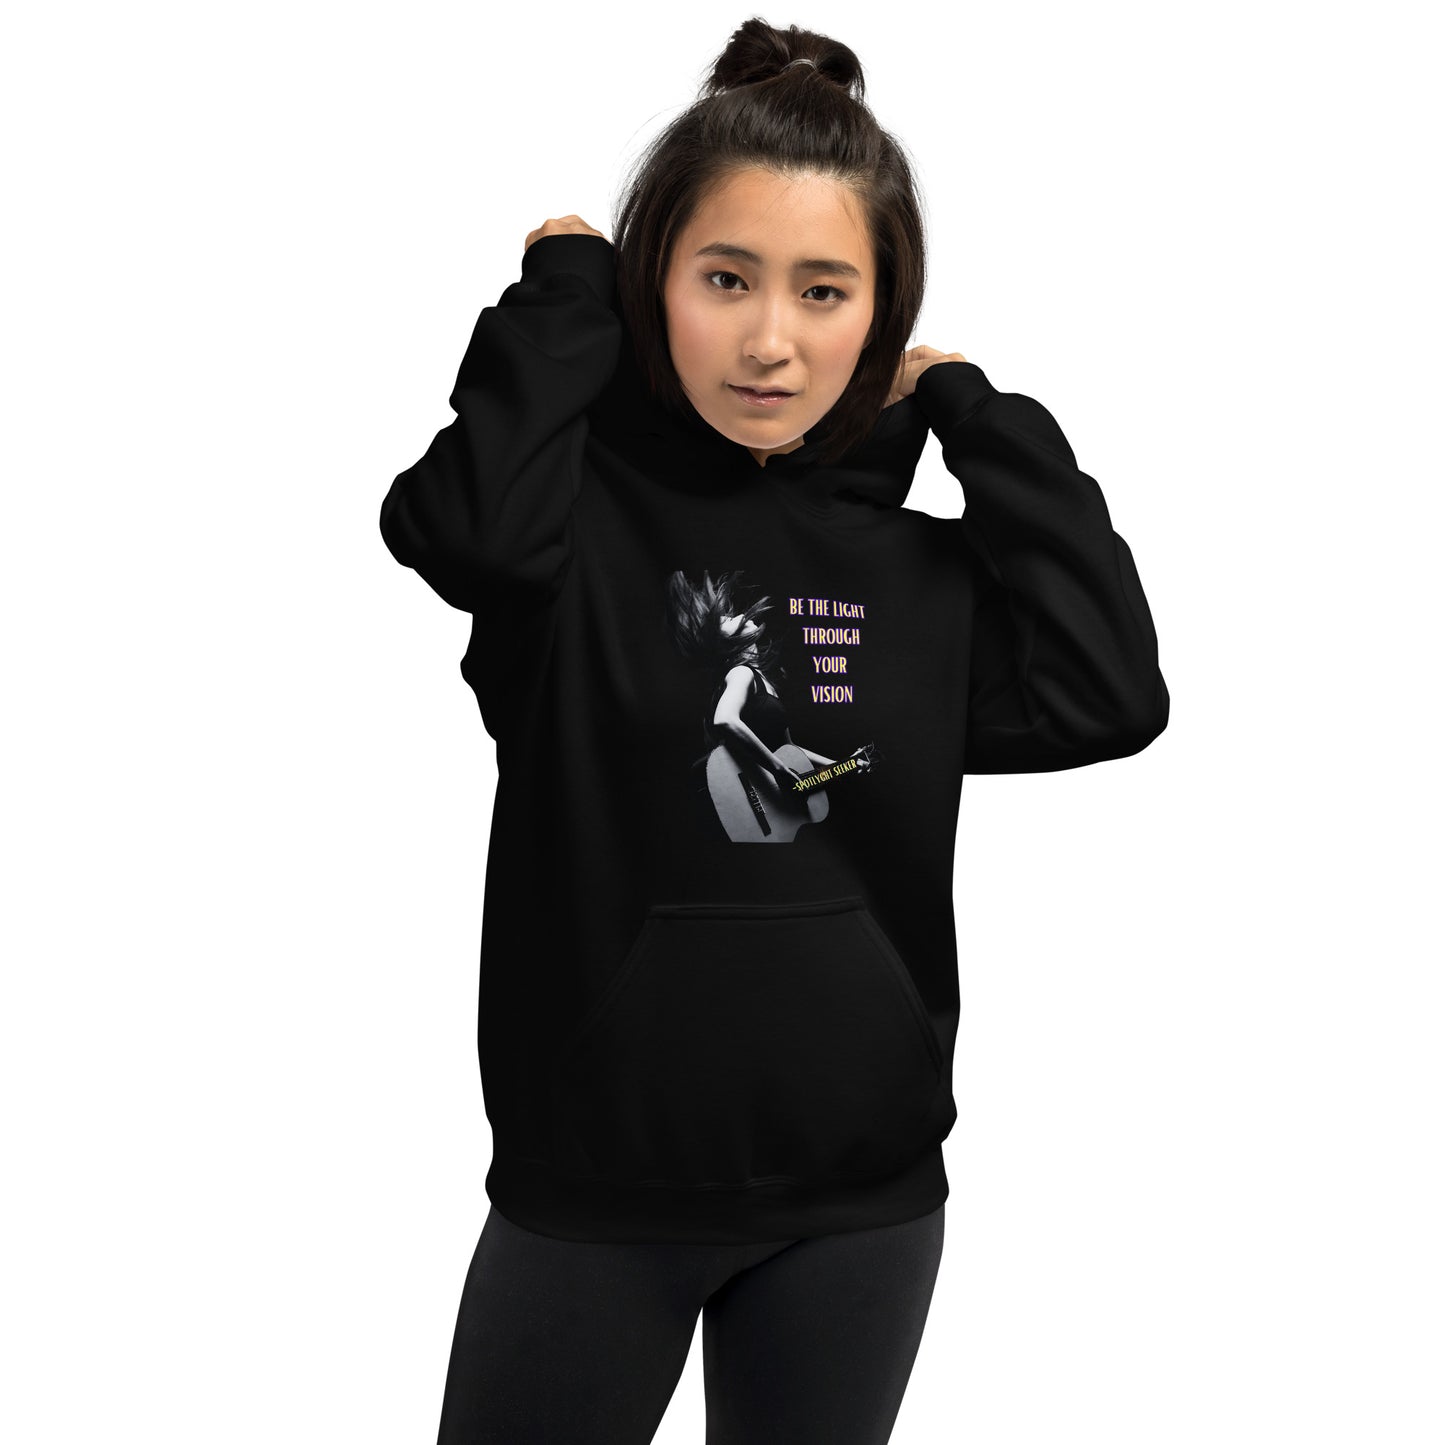 A stylish black and white Heavyweight Be the Light Unisex Hoodie displayed against a backdrop of creativity. The bold graphics symbolize authenticity, inviting artists to embrace their vision and be the light for their audience.